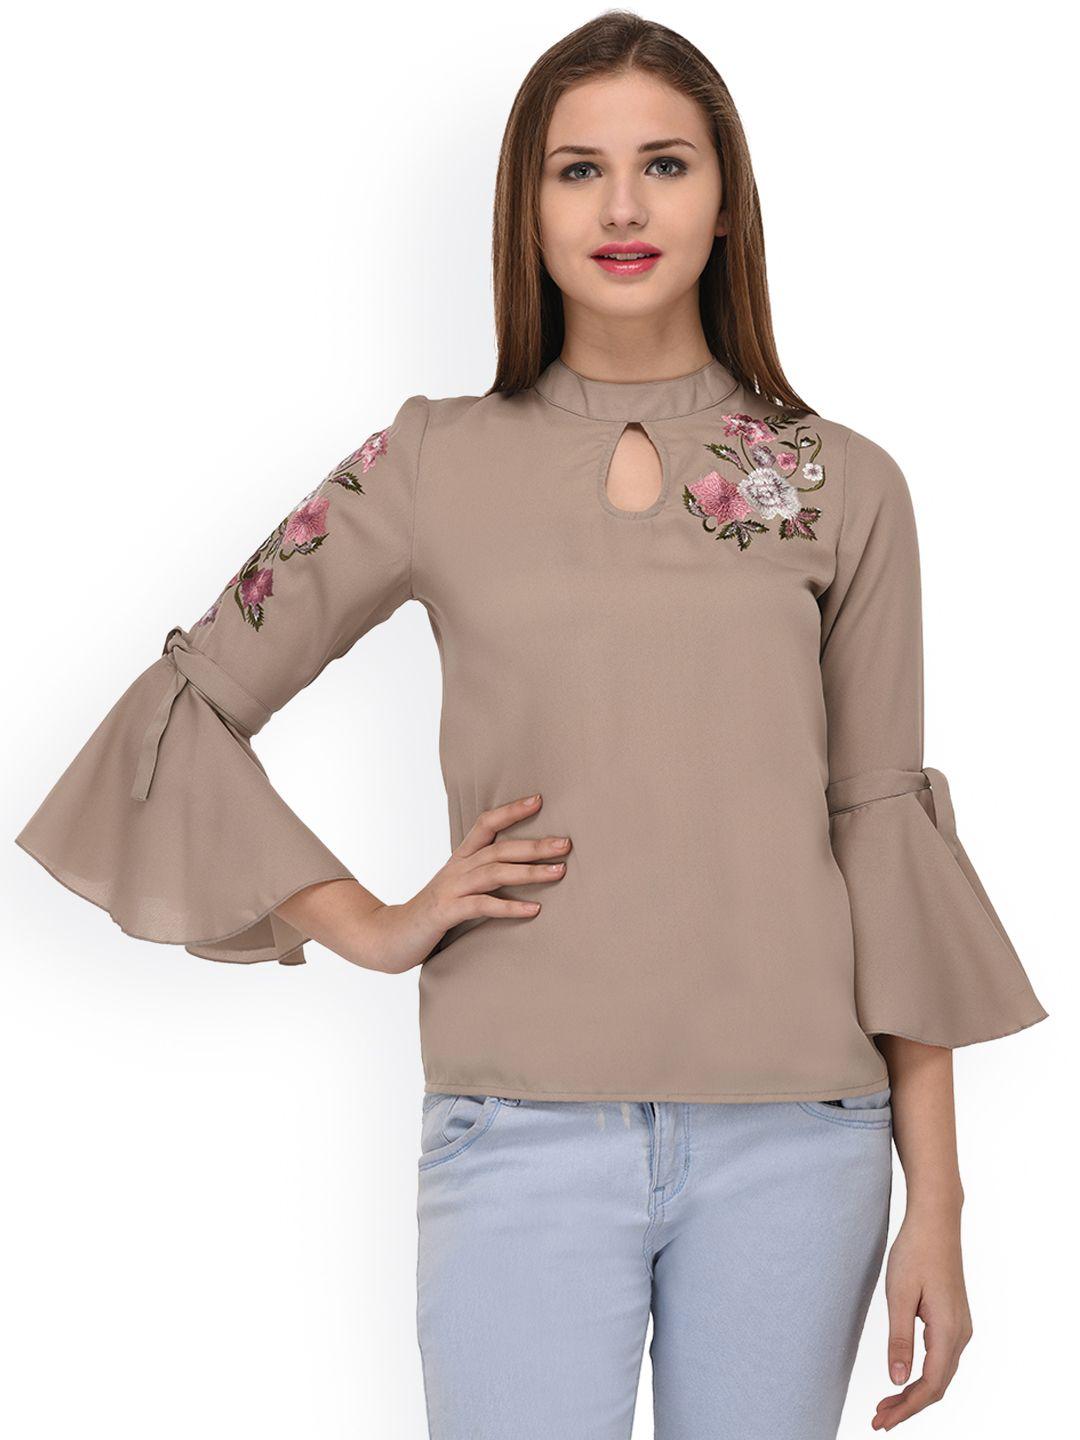 purys women taupe embellished top